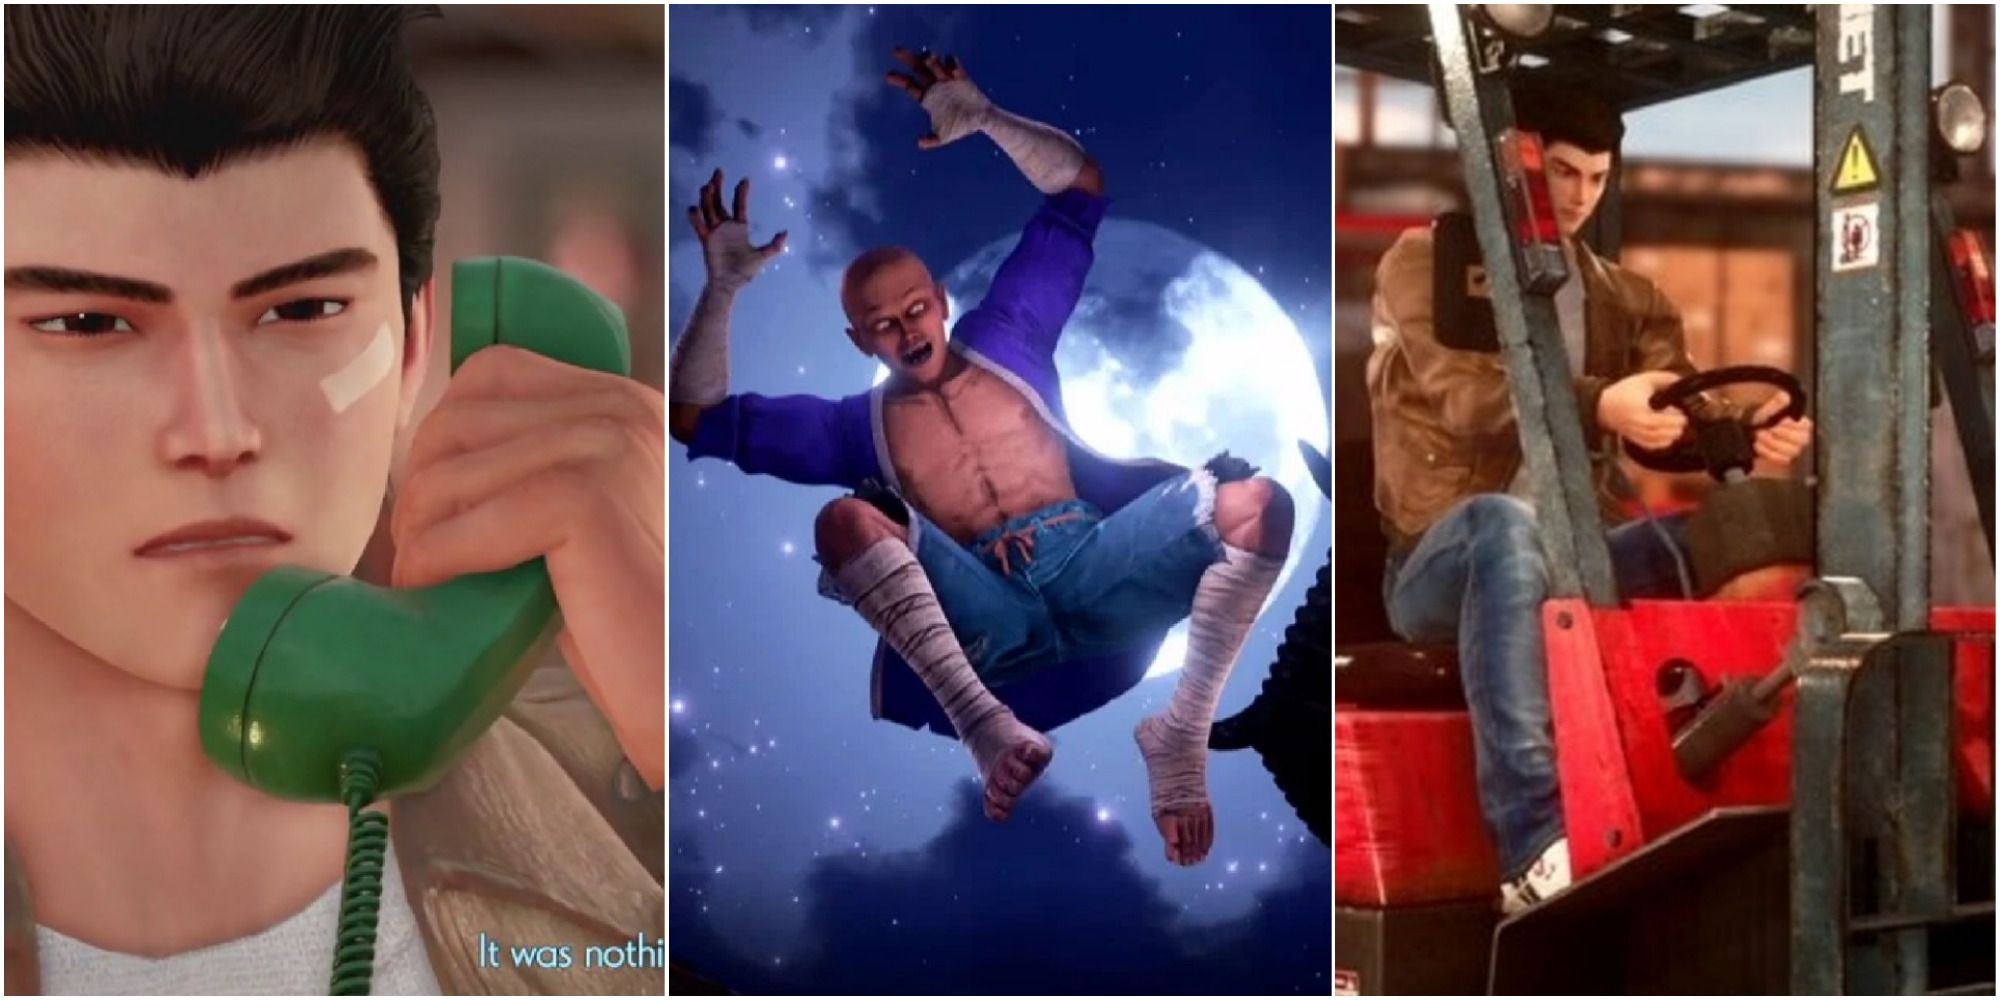 A collage of images from Shenmue 3, including Ryo Hazuki making a phone call; Chai surprise-attacking Ryo and Shenhua; and Ryo piloting a forklift